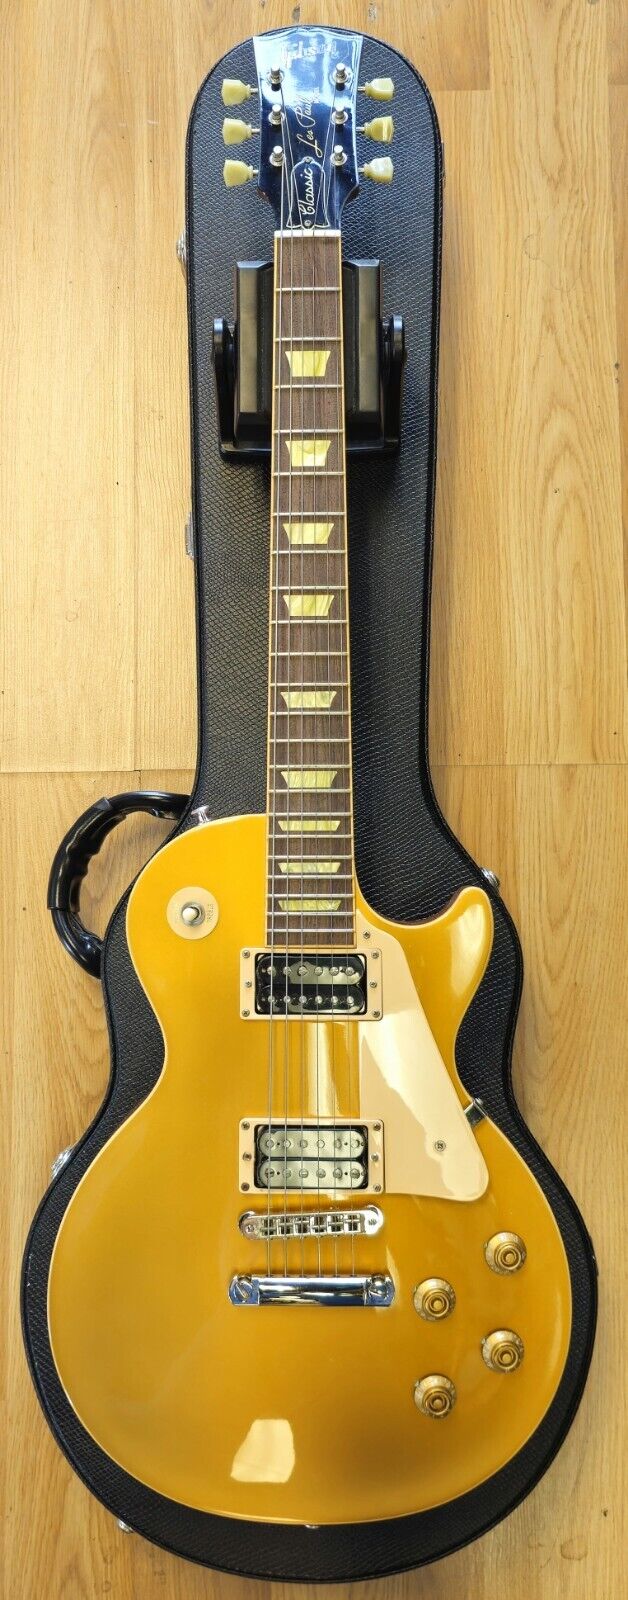 2007 Gibson Les Paul Classic 1960 Reissue Gold Top  W/ Gibson USA deluxe case